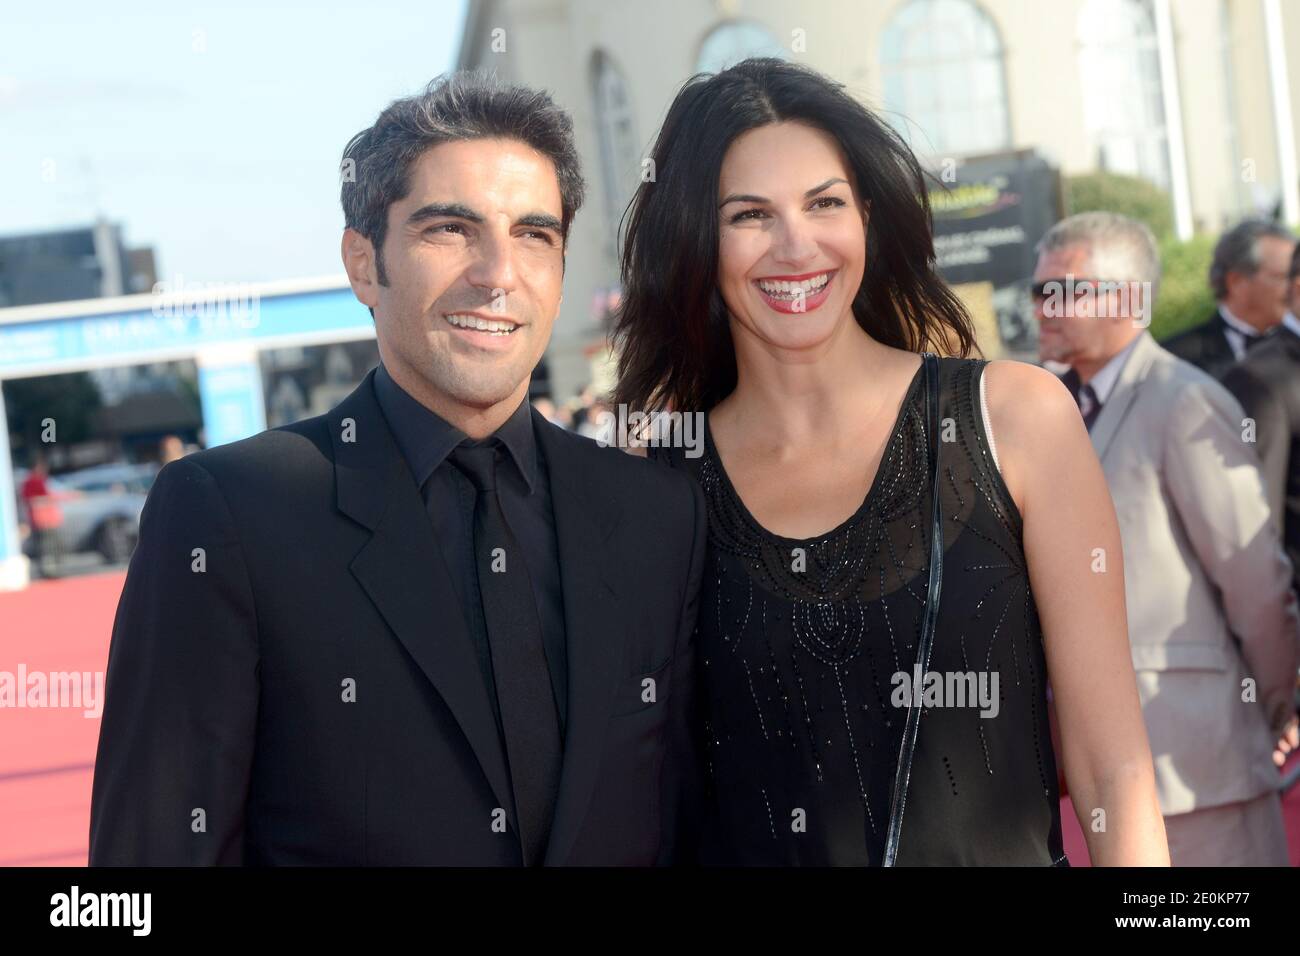 Ary Abittan and Helena Noguerra attending the opening ceremony of the 38th Deauville American Film Festival in Deauville, France on August 31, 2012. Photo by Nicolas Briquet/ABACAPRESS.COM Stock Photo